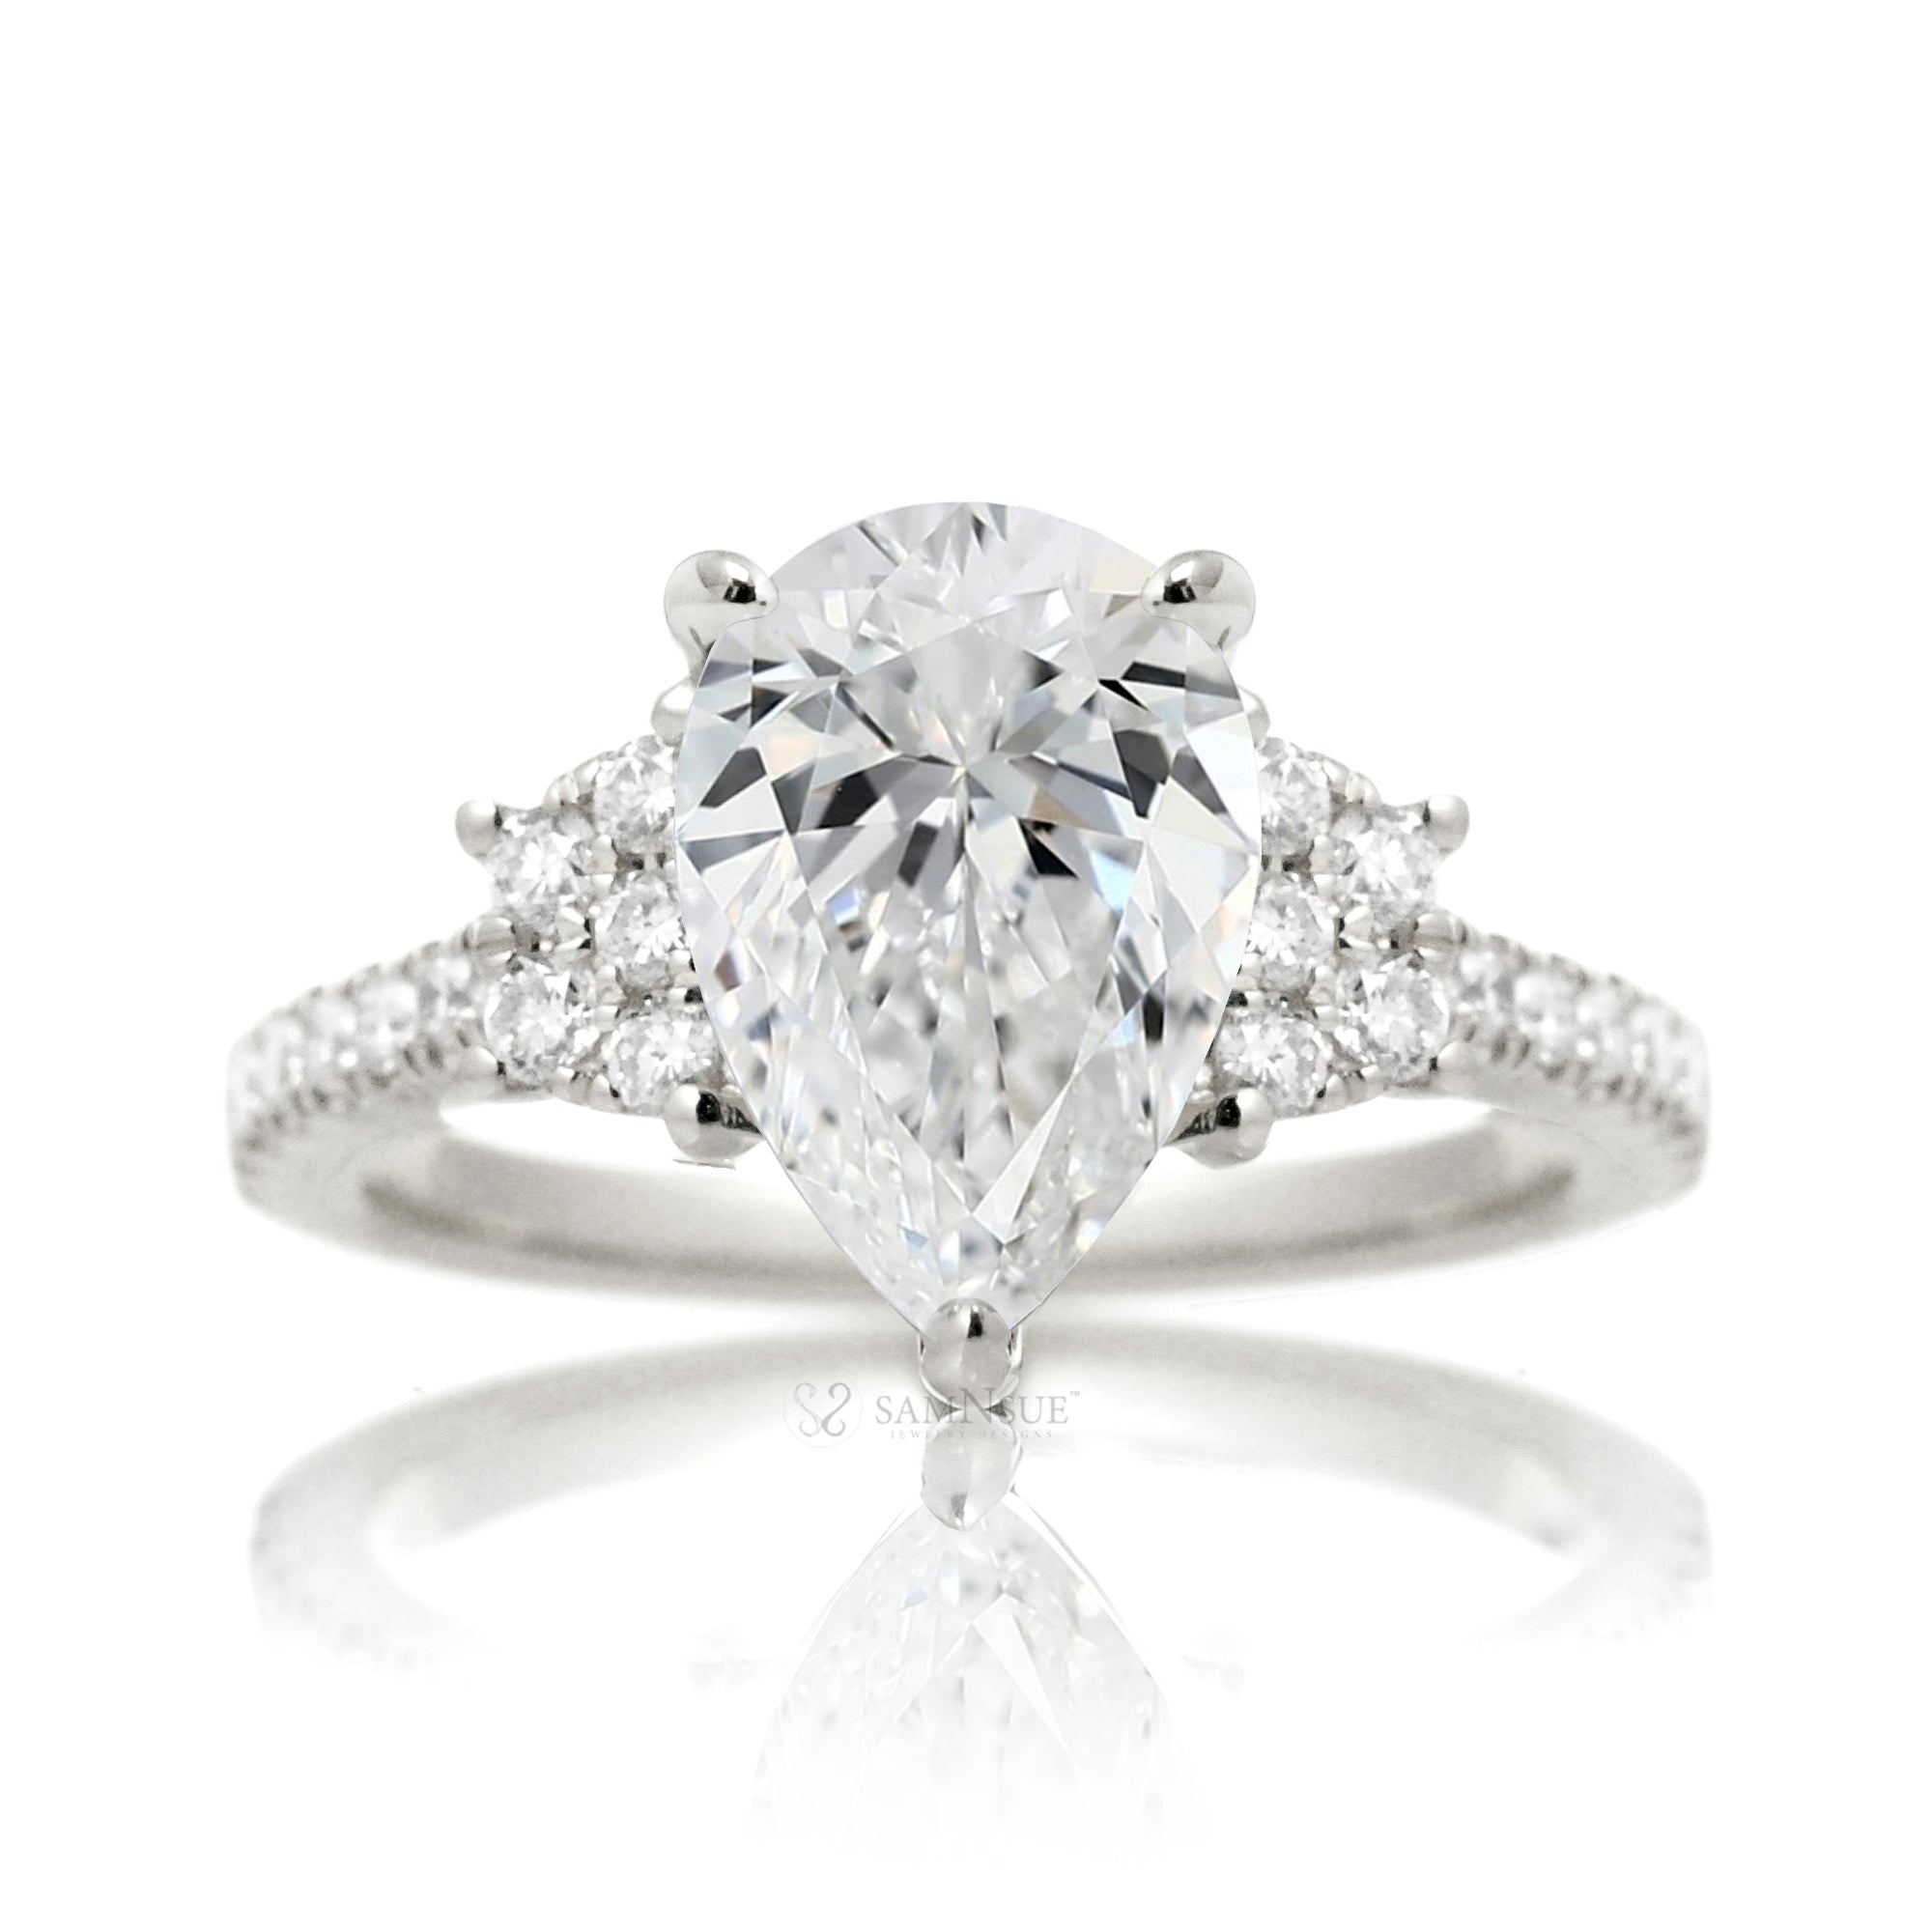 The Taylor Pear Diamond Ring (Lab-Grown)